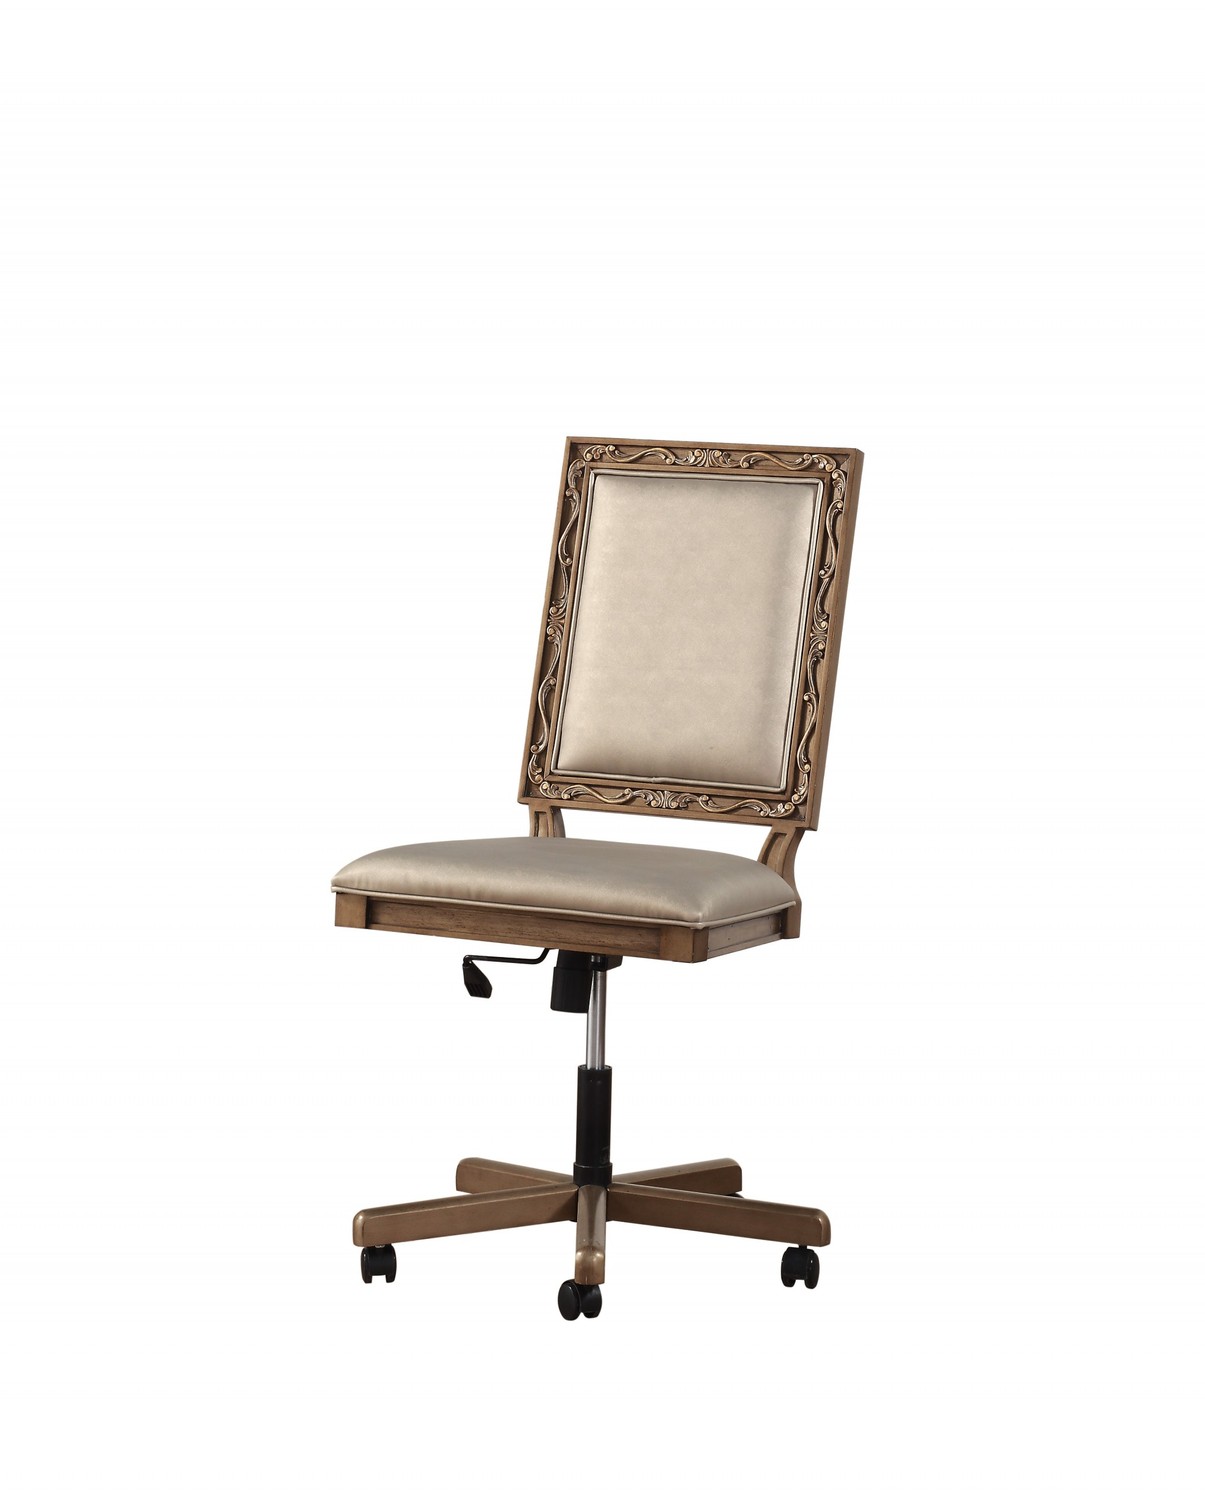 24" X 22" X 41" Champagne Faux Leather Upholstered (Seat) and Antique Gold Wood Executive Office Chair